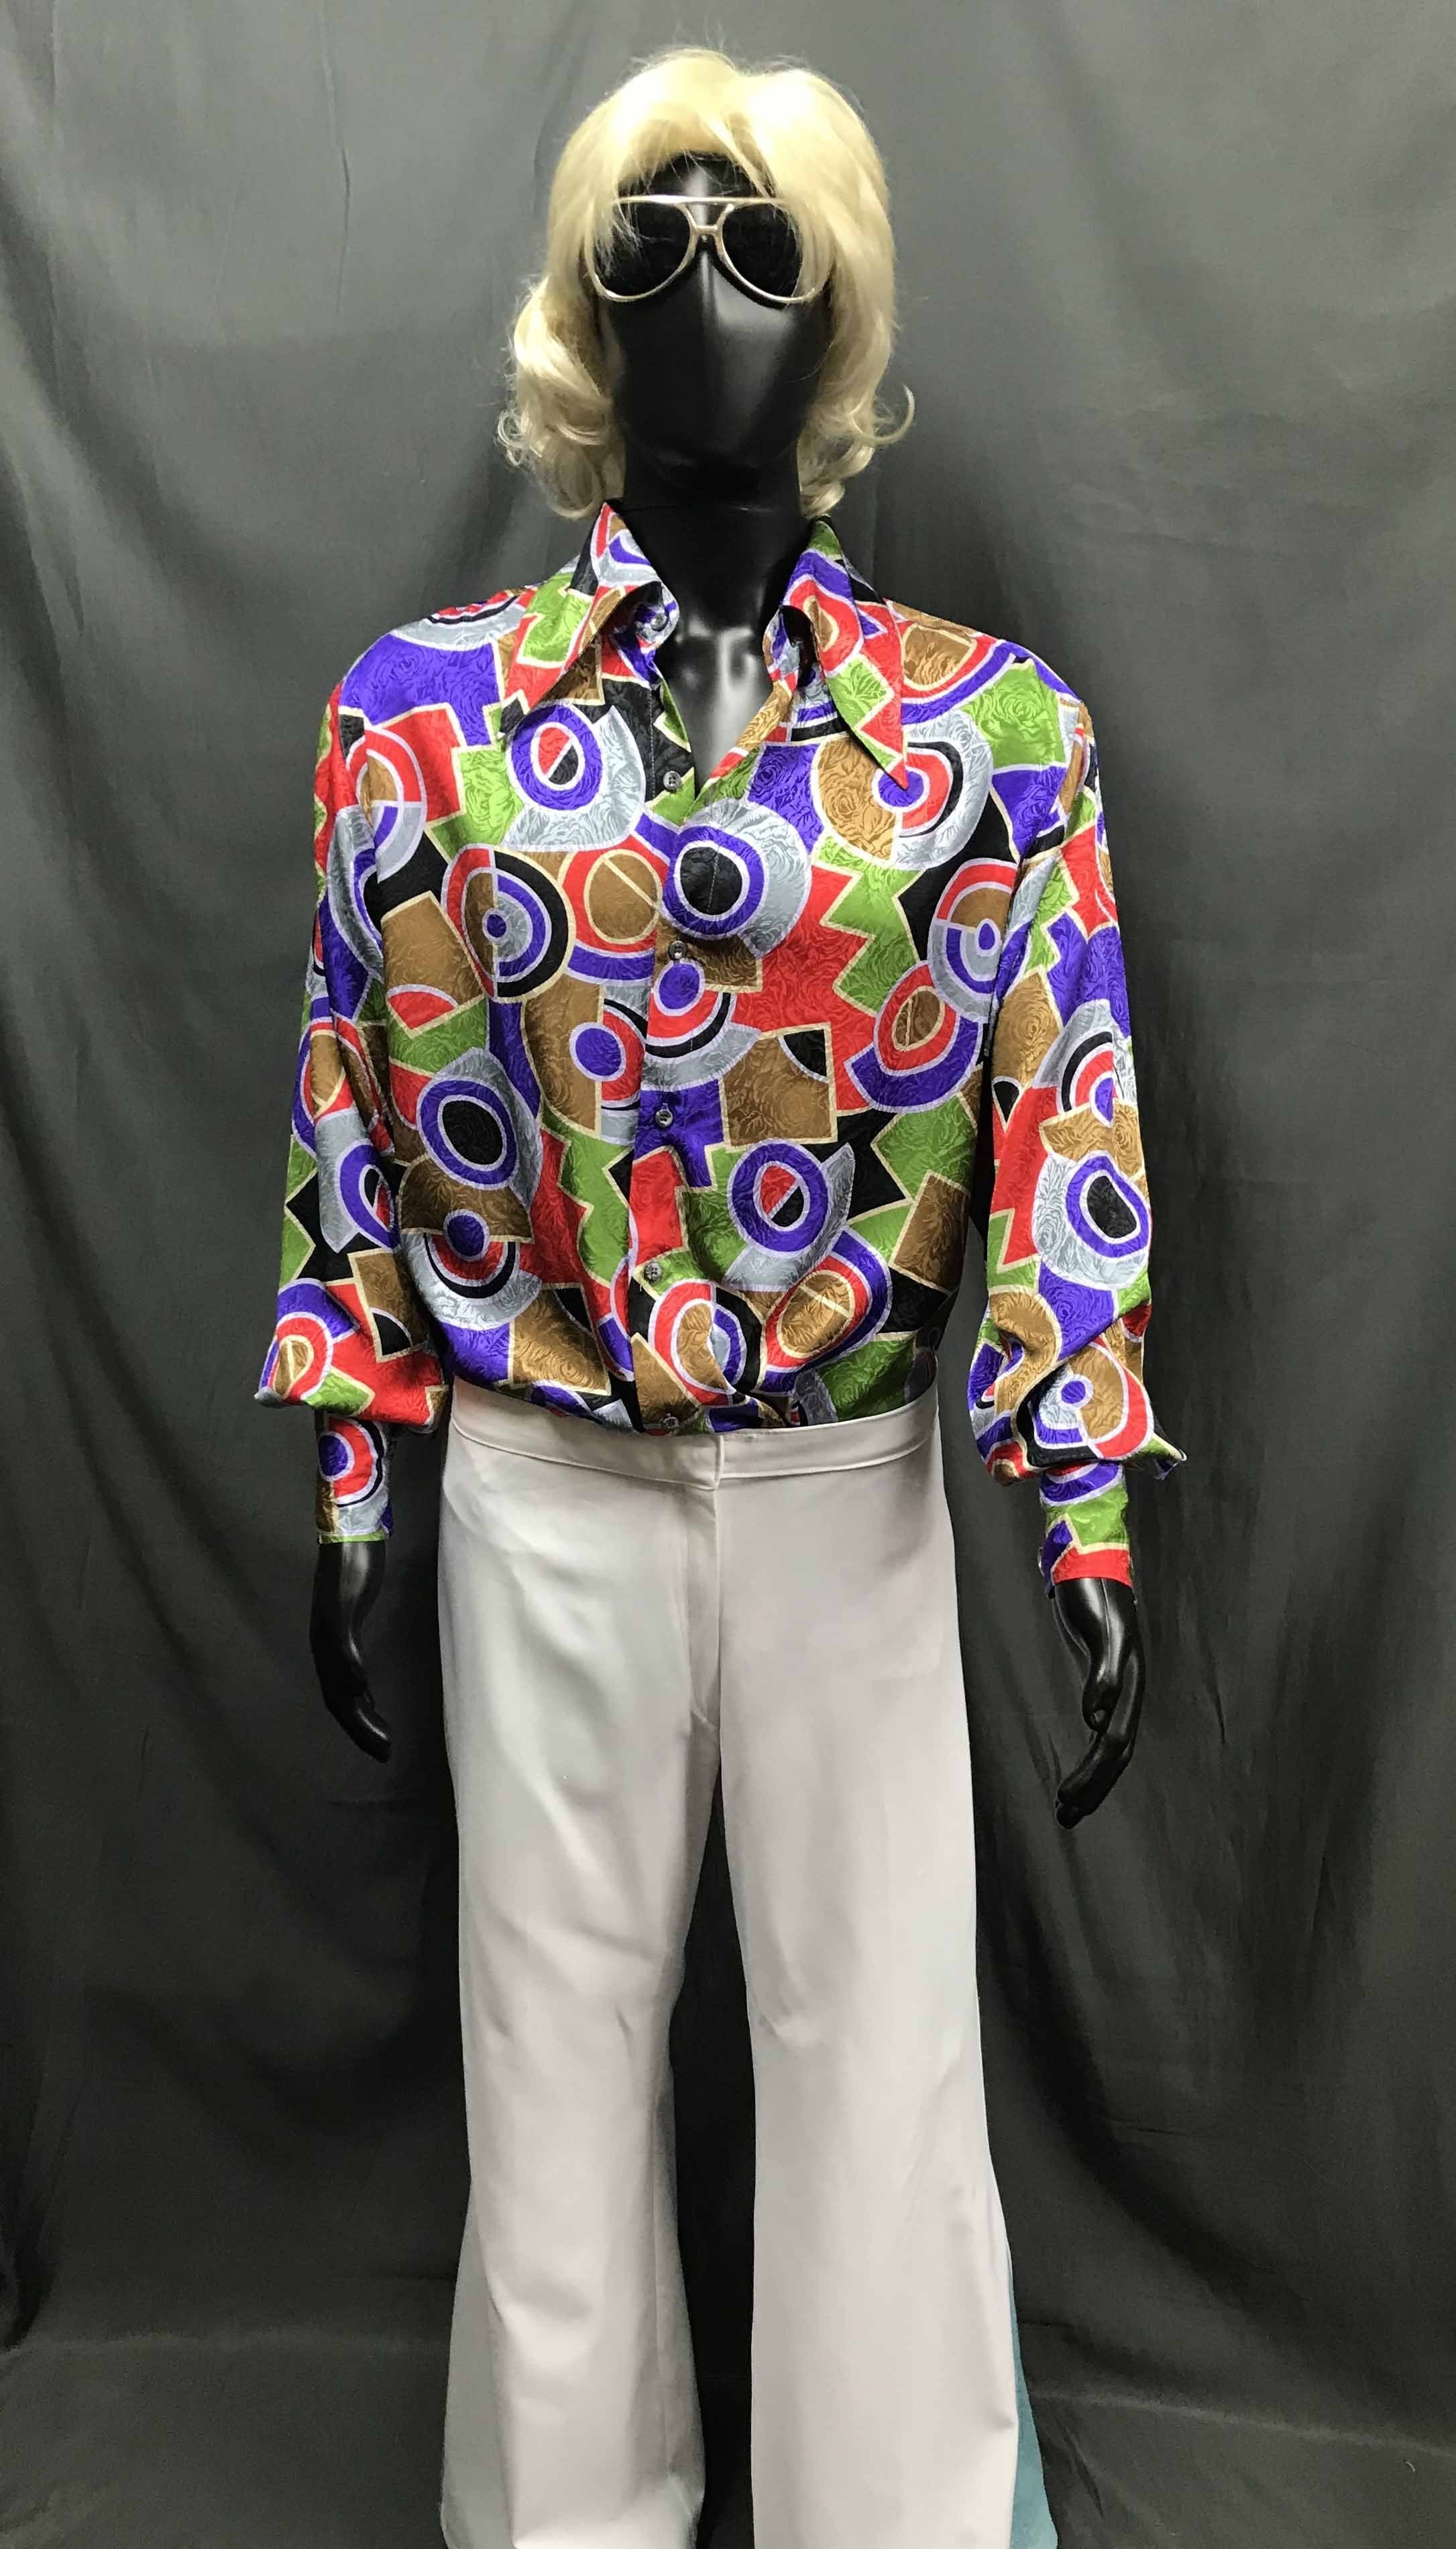 Mens Disco Costume - Multi-Pattern Shirt with White Flares - Hire